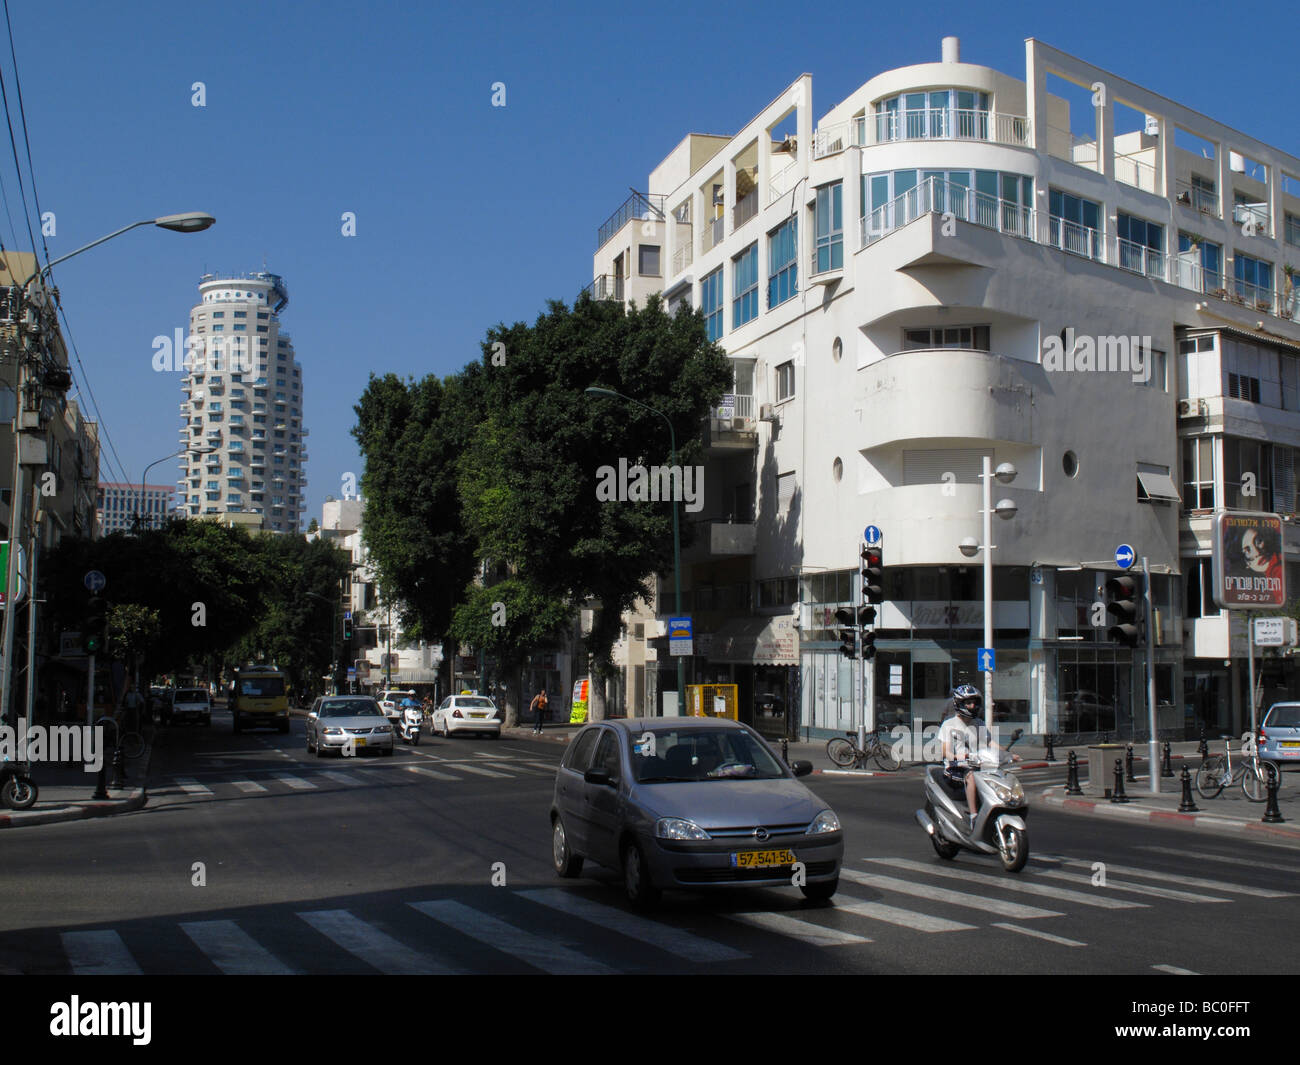 A renovated building which was built in the 1930s in Bauhaus architecture  style with curved facade in Ben Yehuda street downtown Tel Aviv Israel  Stock Photo - Alamy